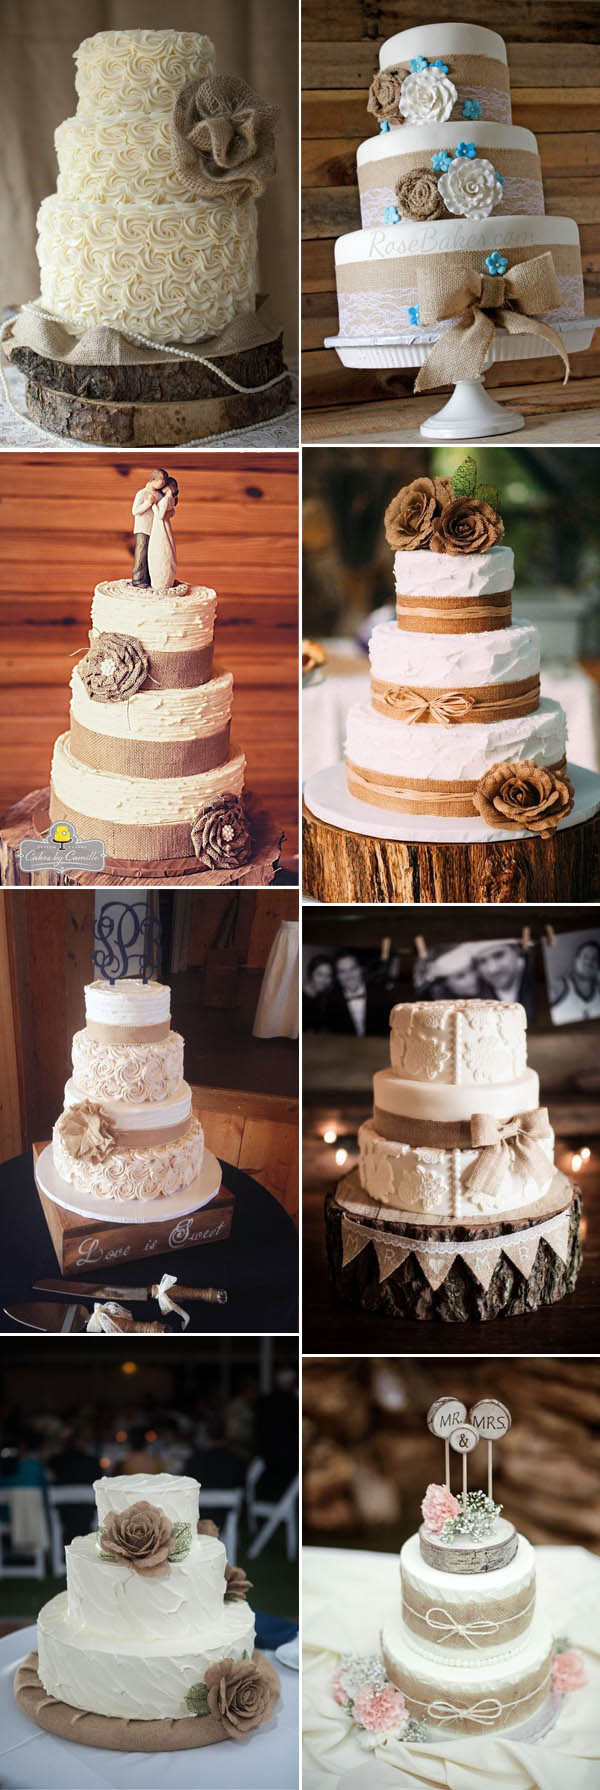 Simple Rustic Wedding Cakes
 The Most plete Burlap Rustic Wedding Ideas For Your